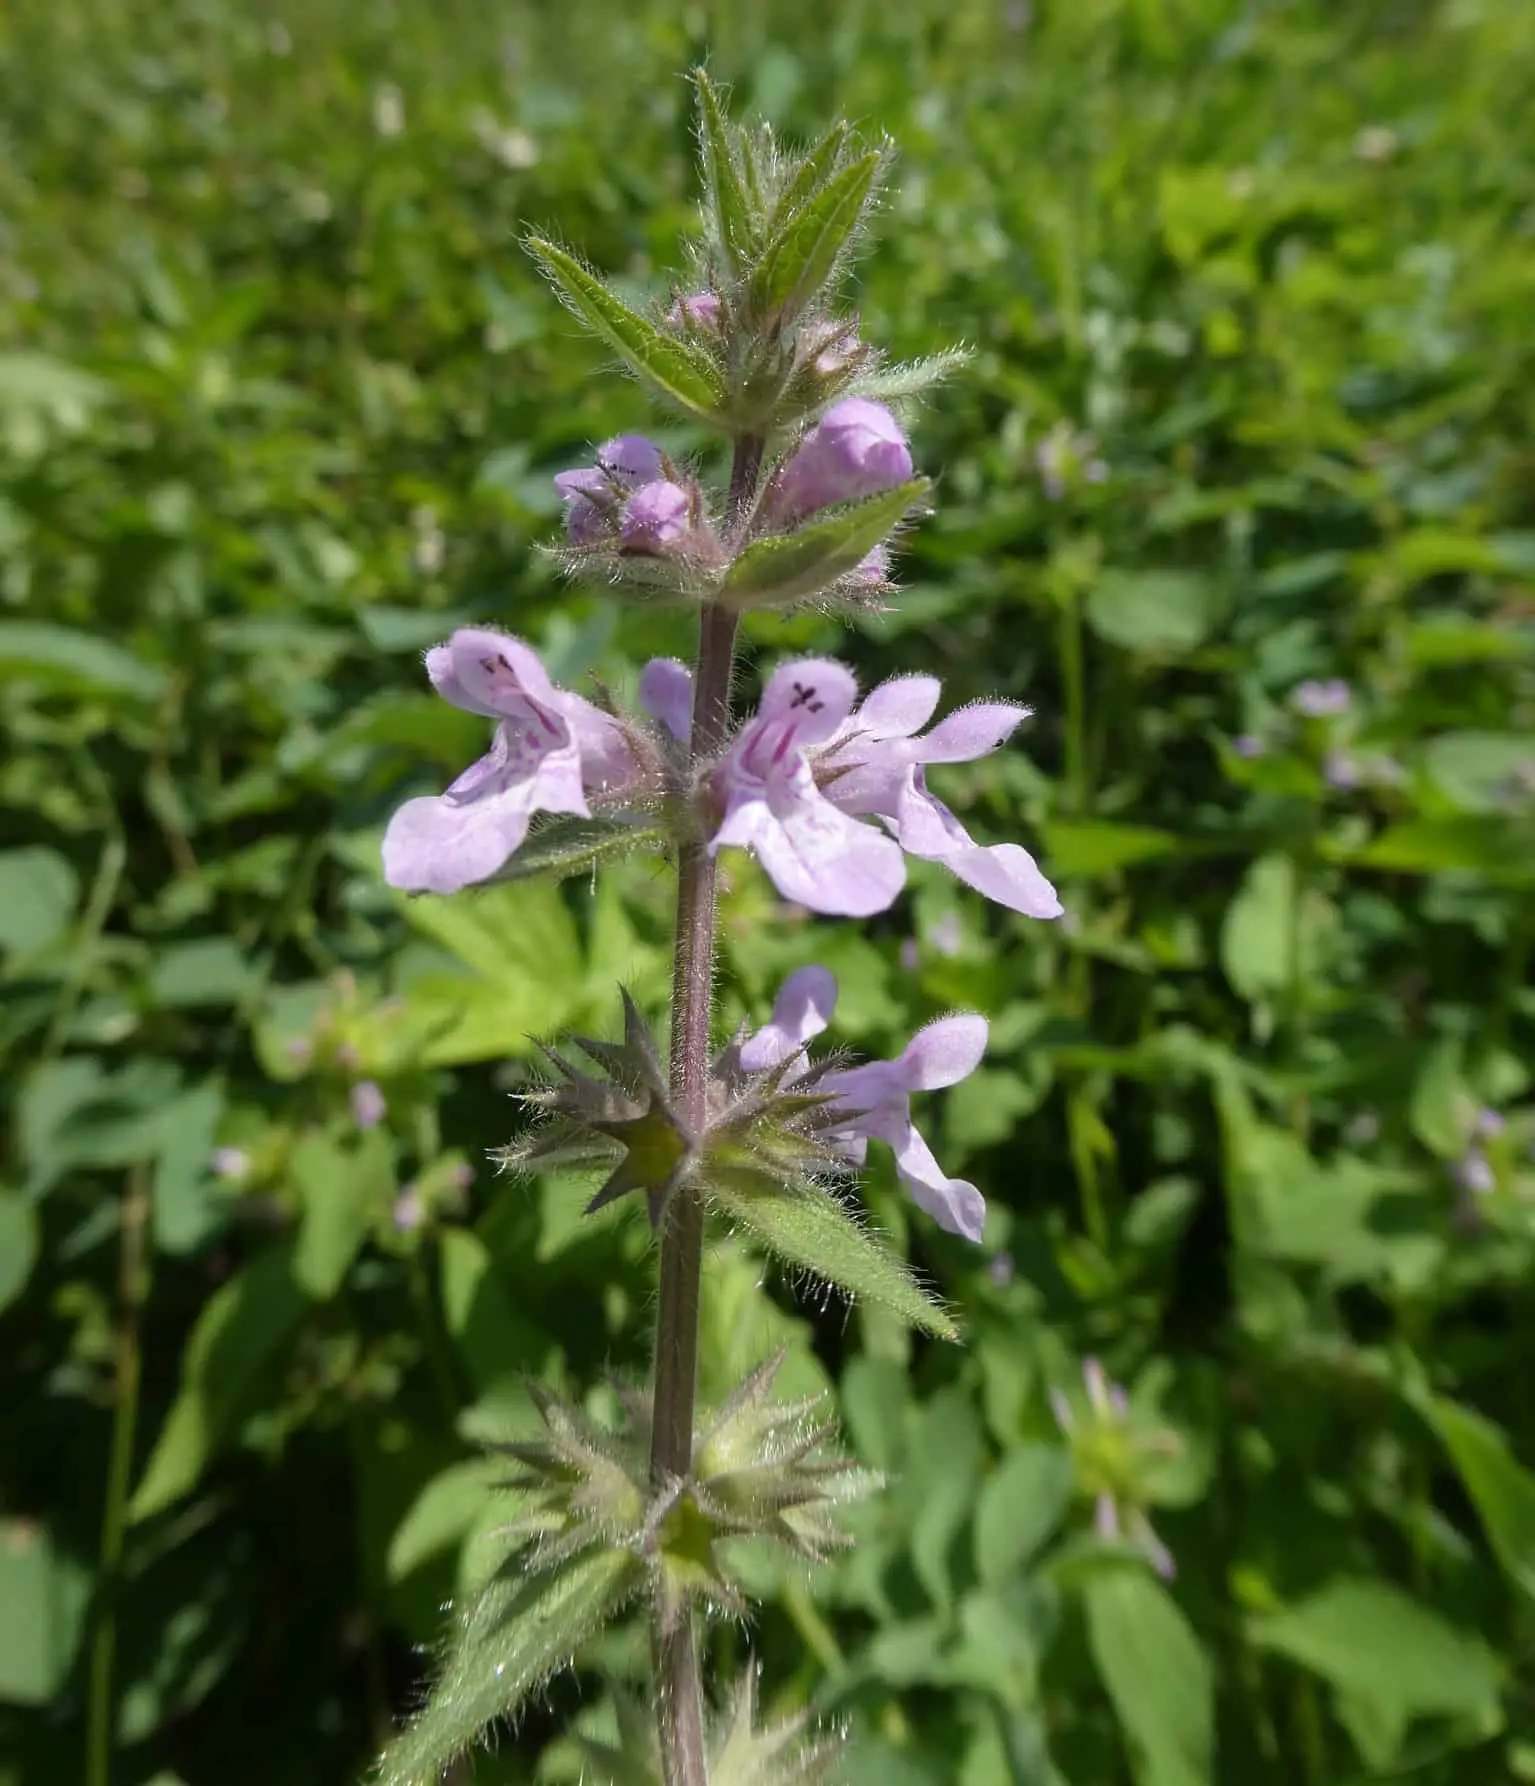 Marsh Hedge Nettle (Stachys palustris) is a species similar to the common nettle